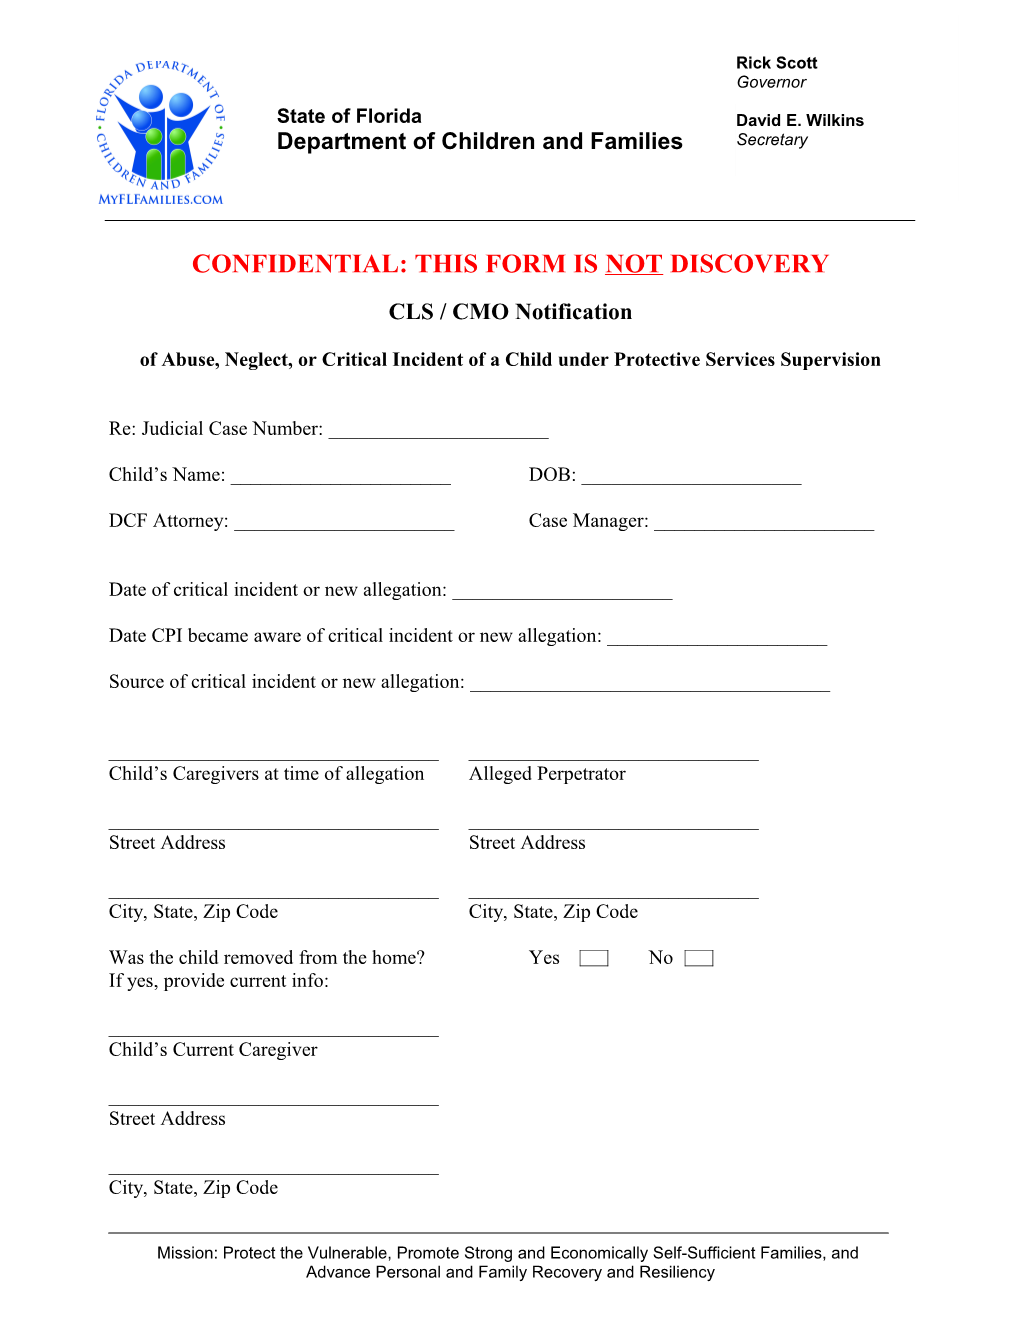 Confidential: This Form Is Not Discovery